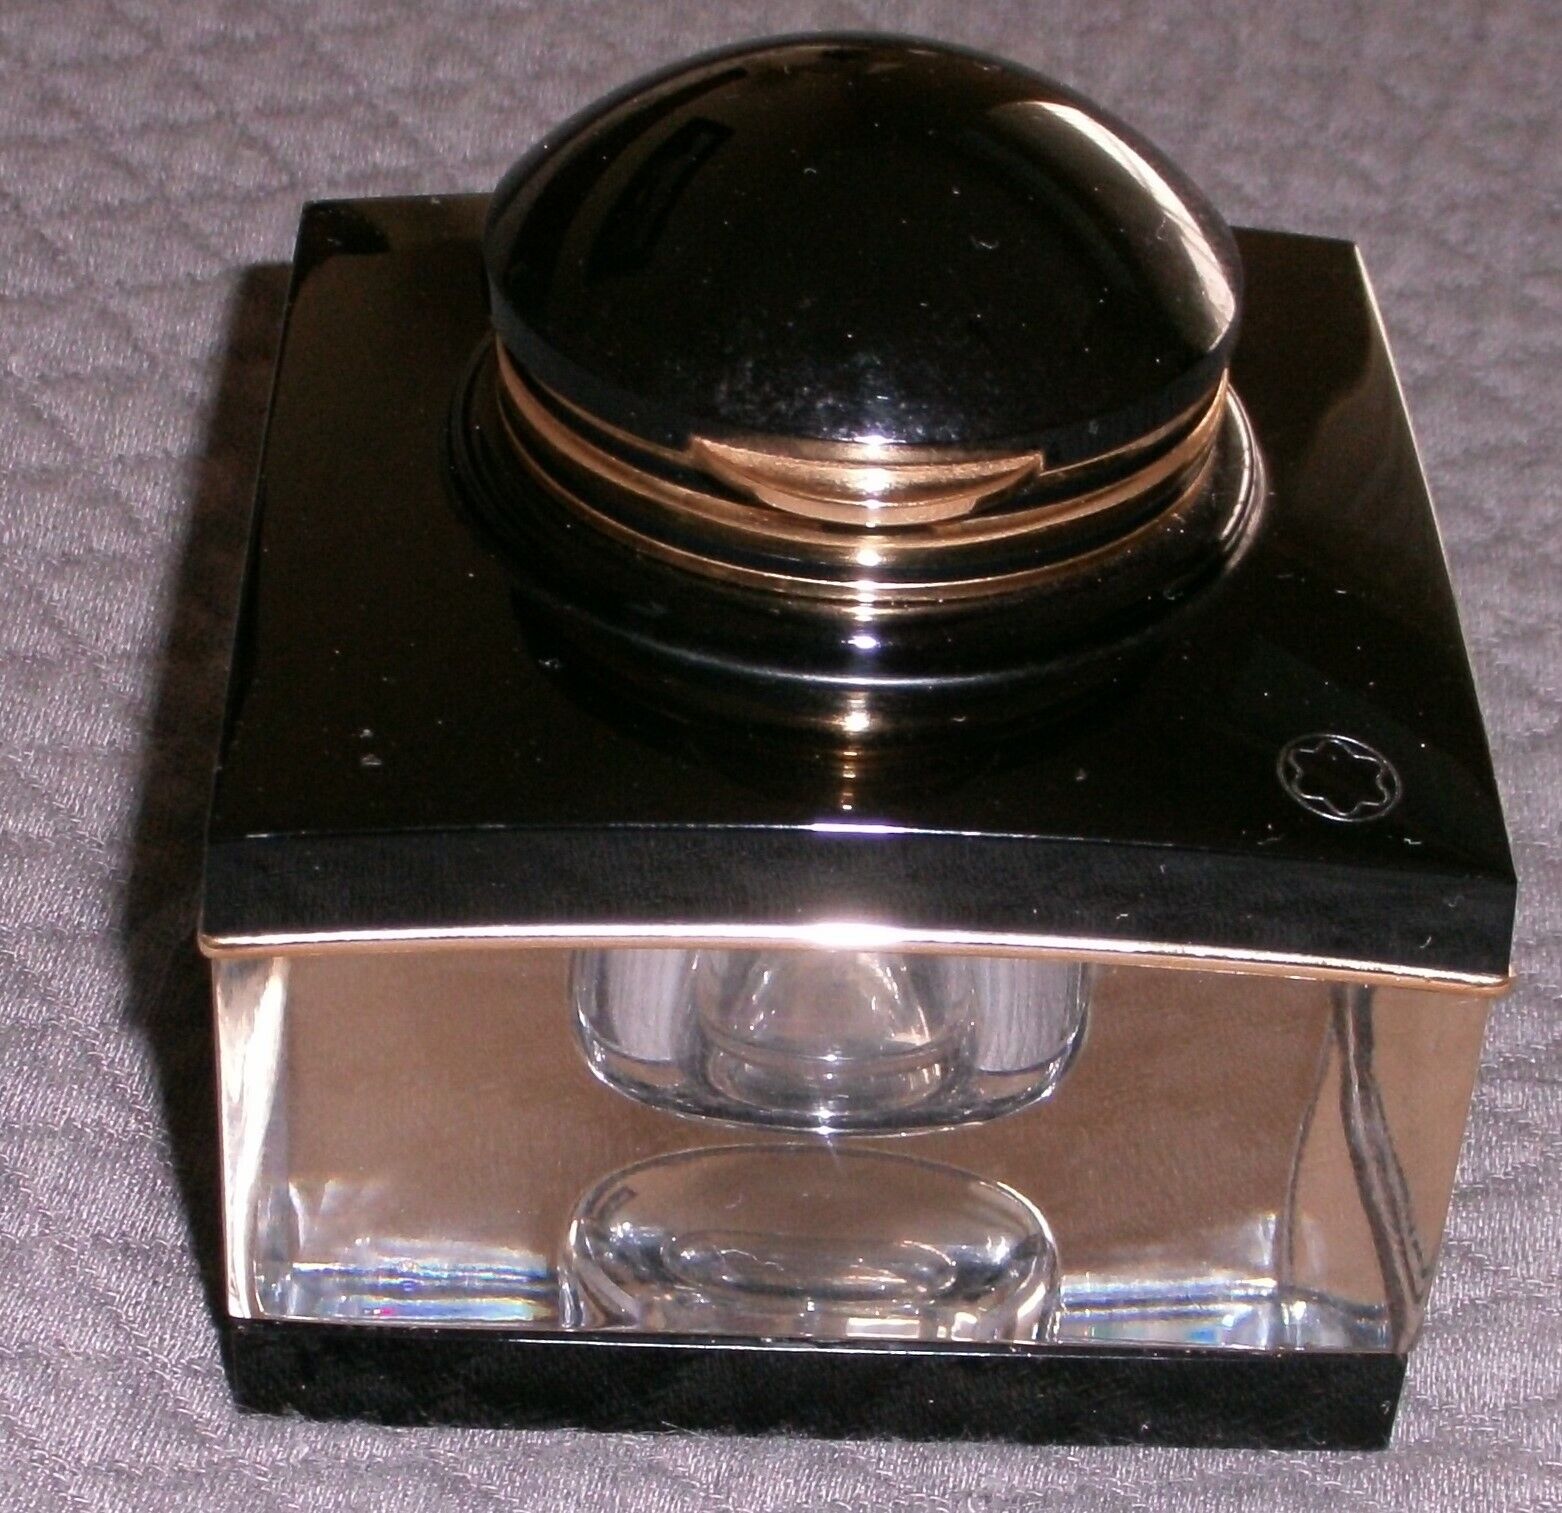 Montblanc Meisterstuck Tintenglass Inkwell-- Black Resin, Crystal, Gold Accents